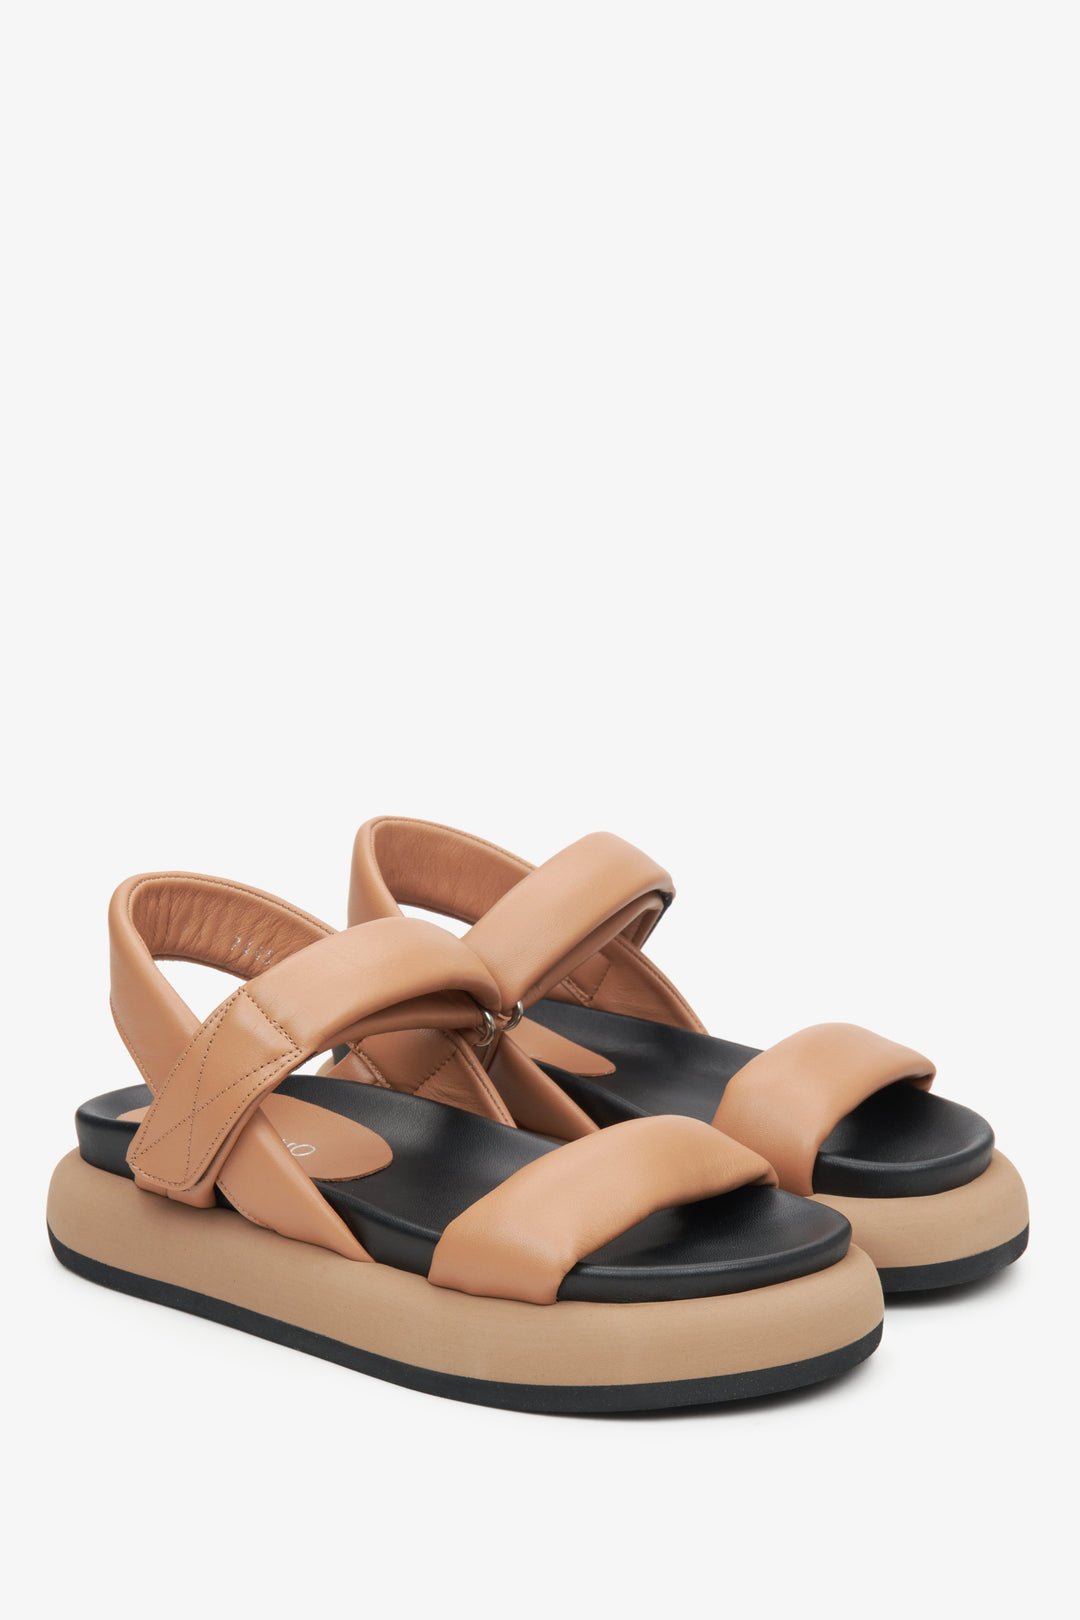 Women's brown sandals with a soft sole by Estro.